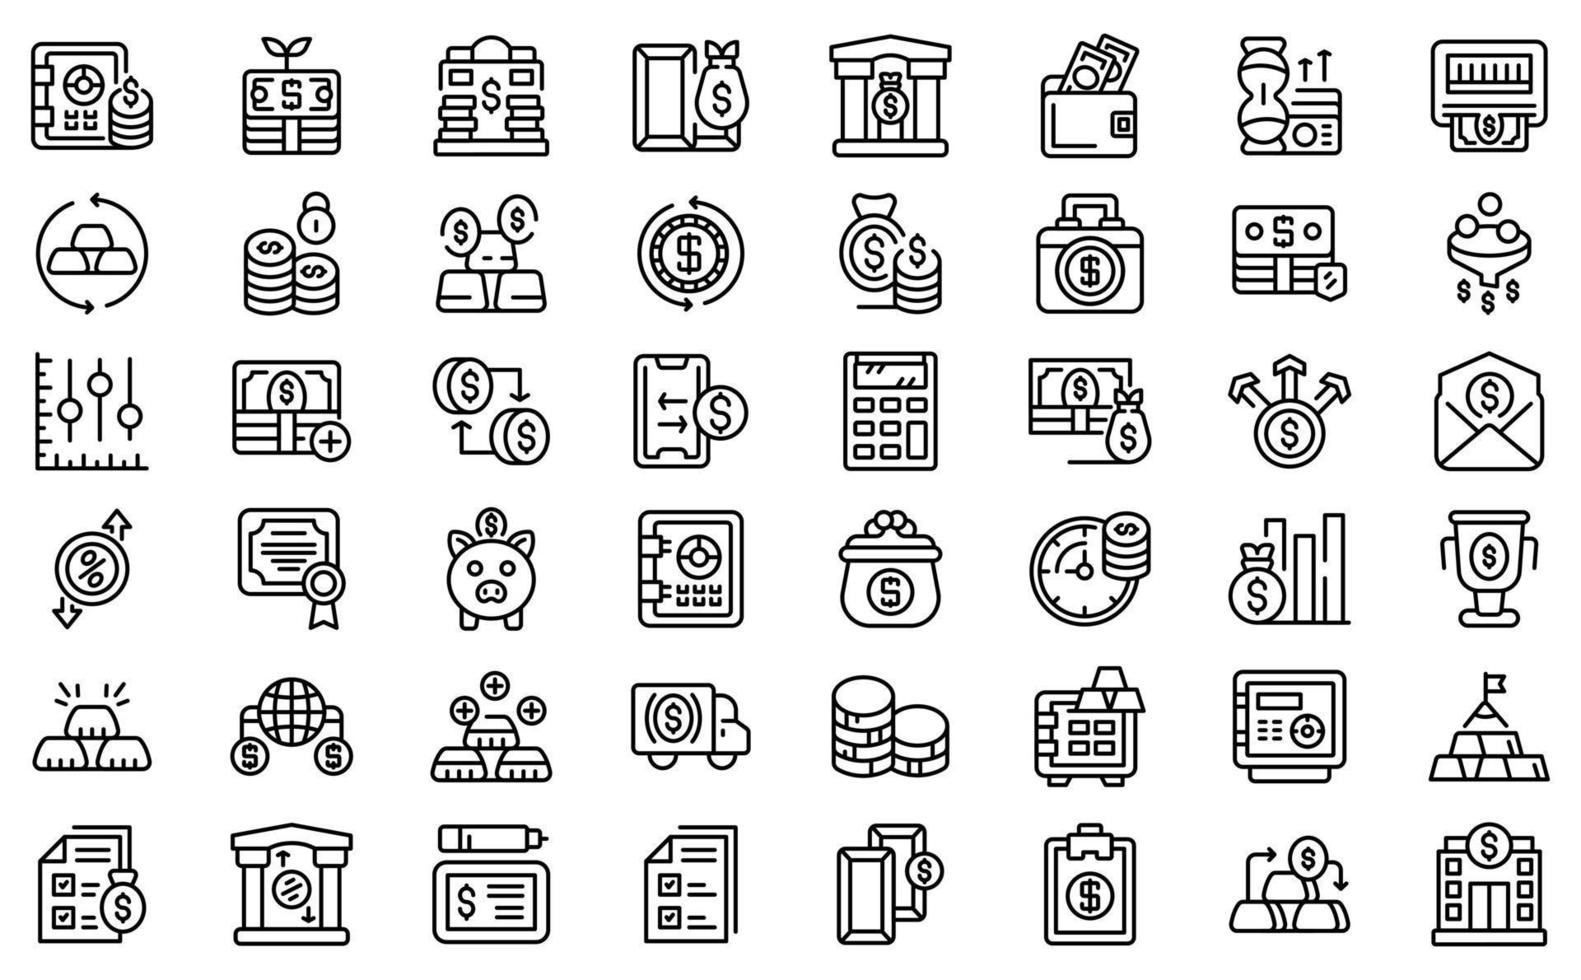 Bank reserves icons set, outline style vector